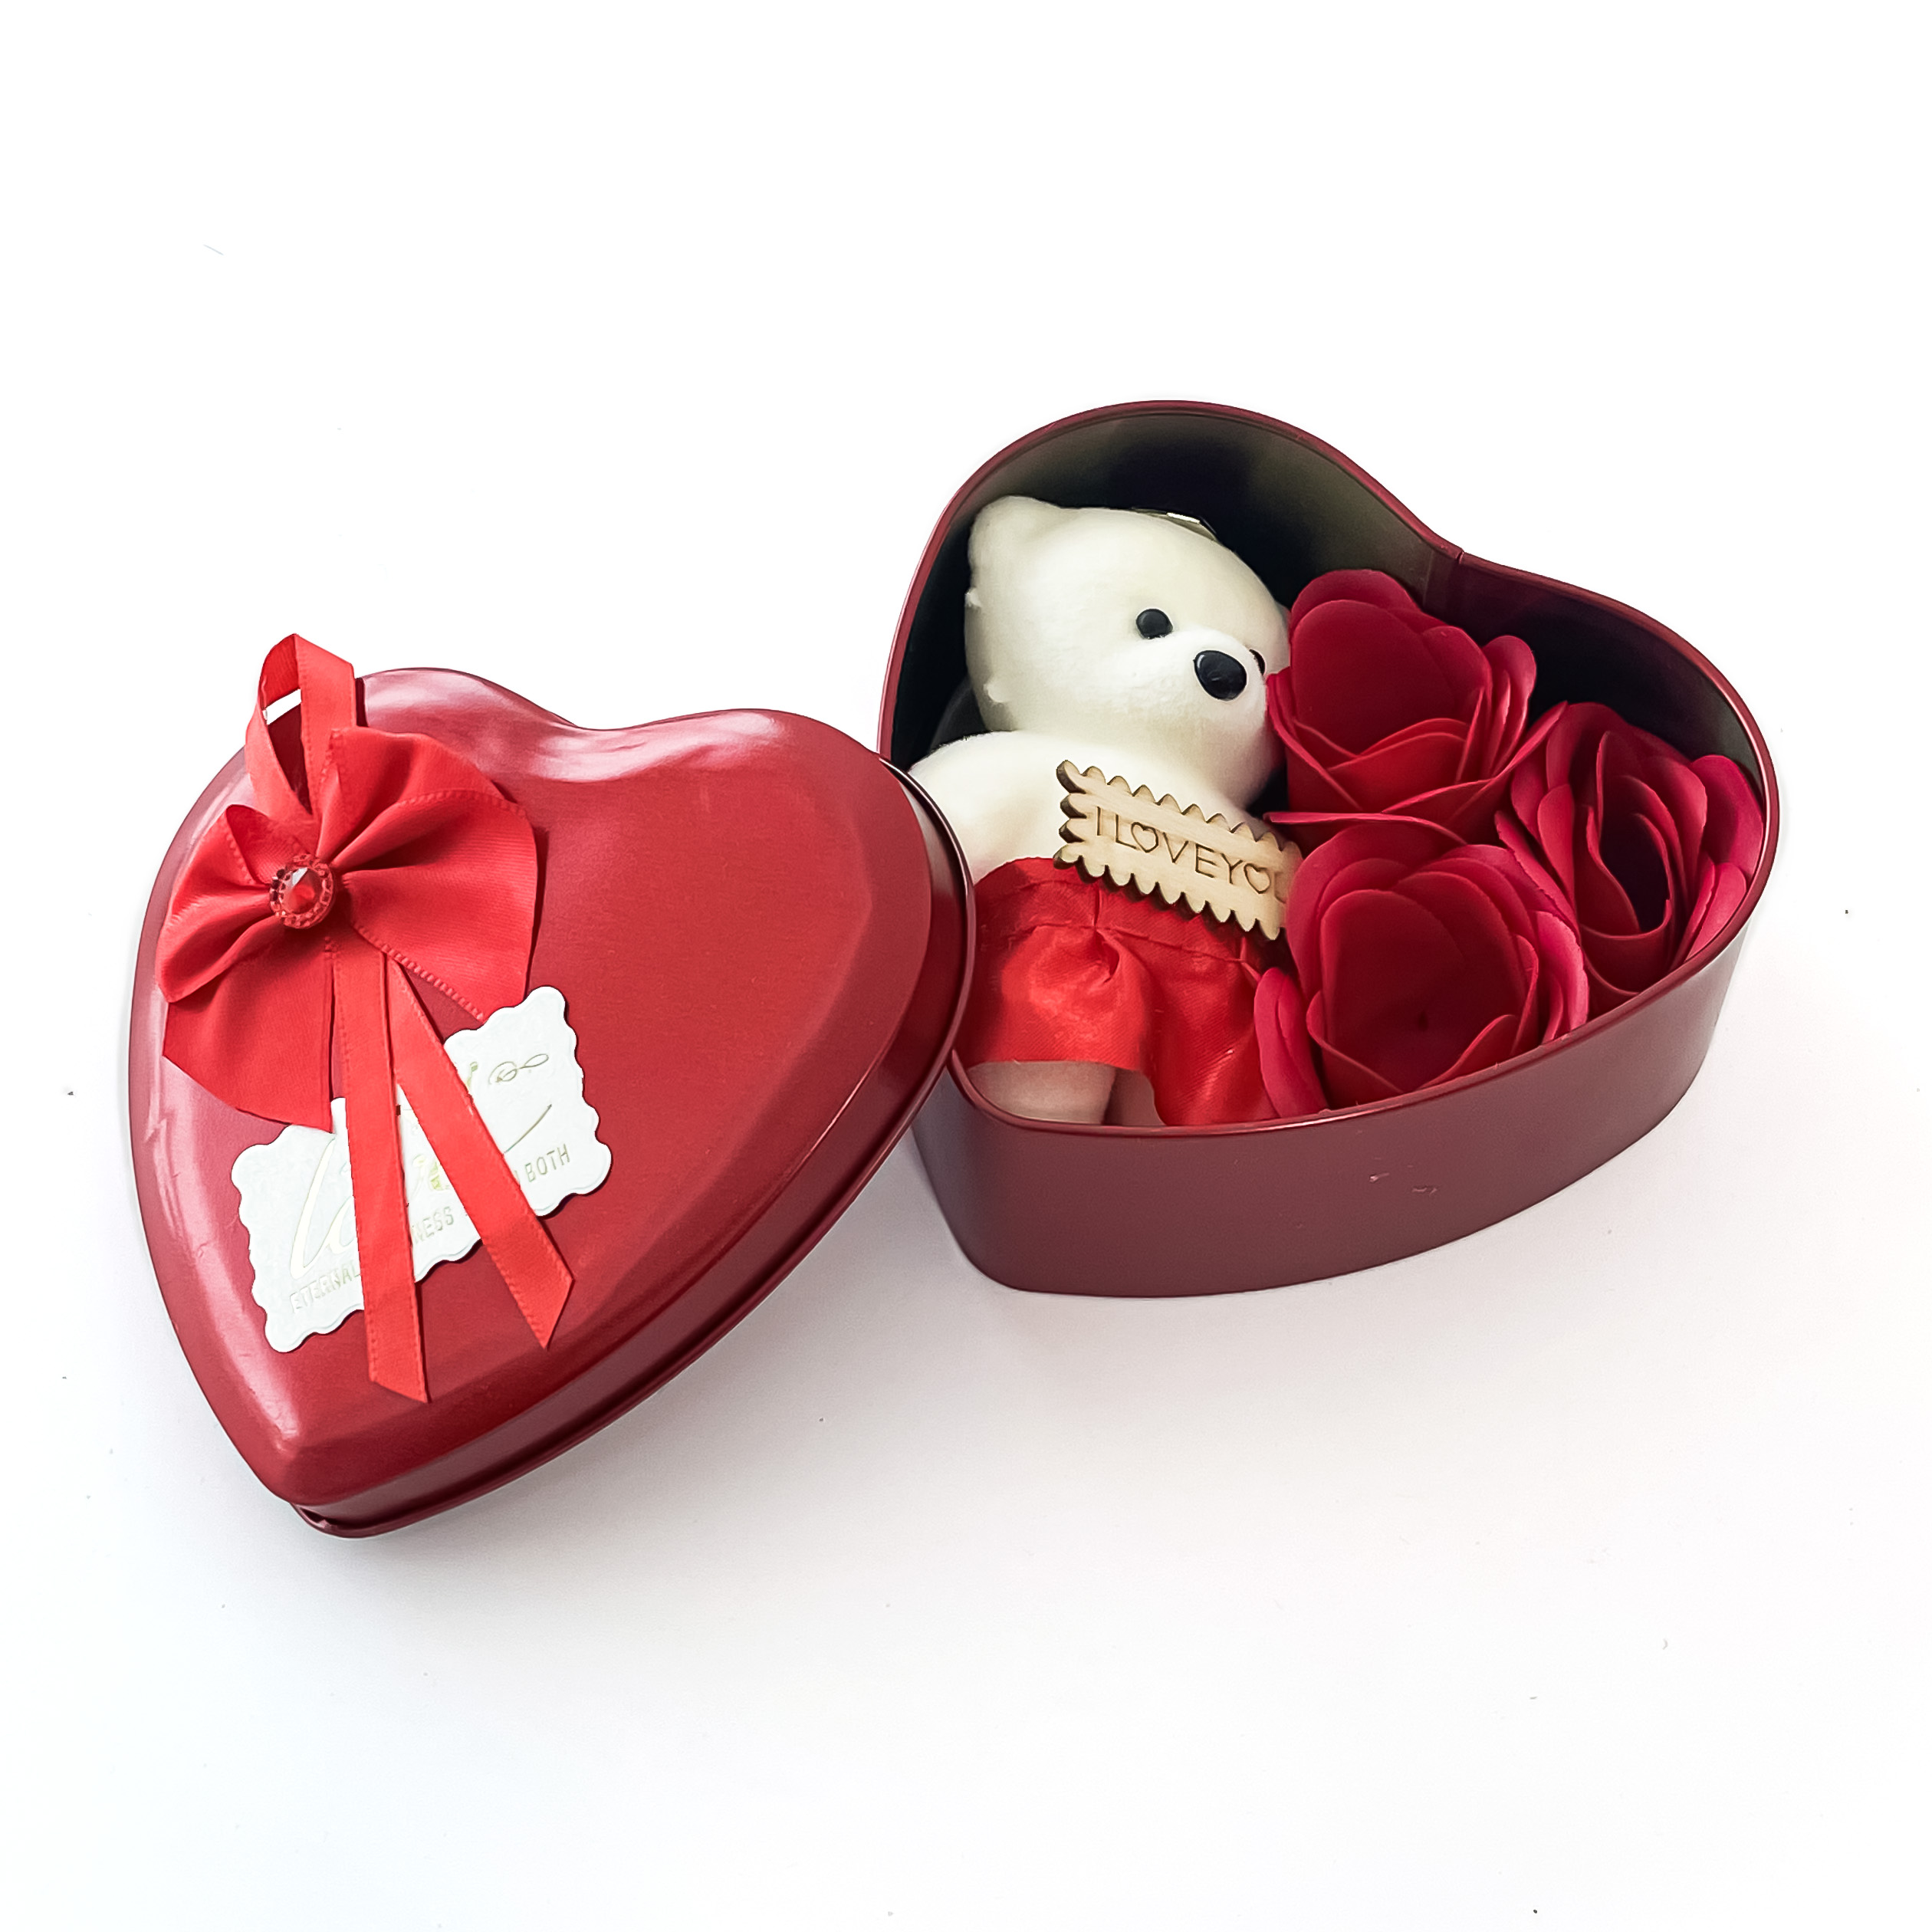 Way To Celebrate Valentine's Day Chocolate-Scented Plush Teddy Bear in  Deluxe Gift Box, Gray - Walmart.com